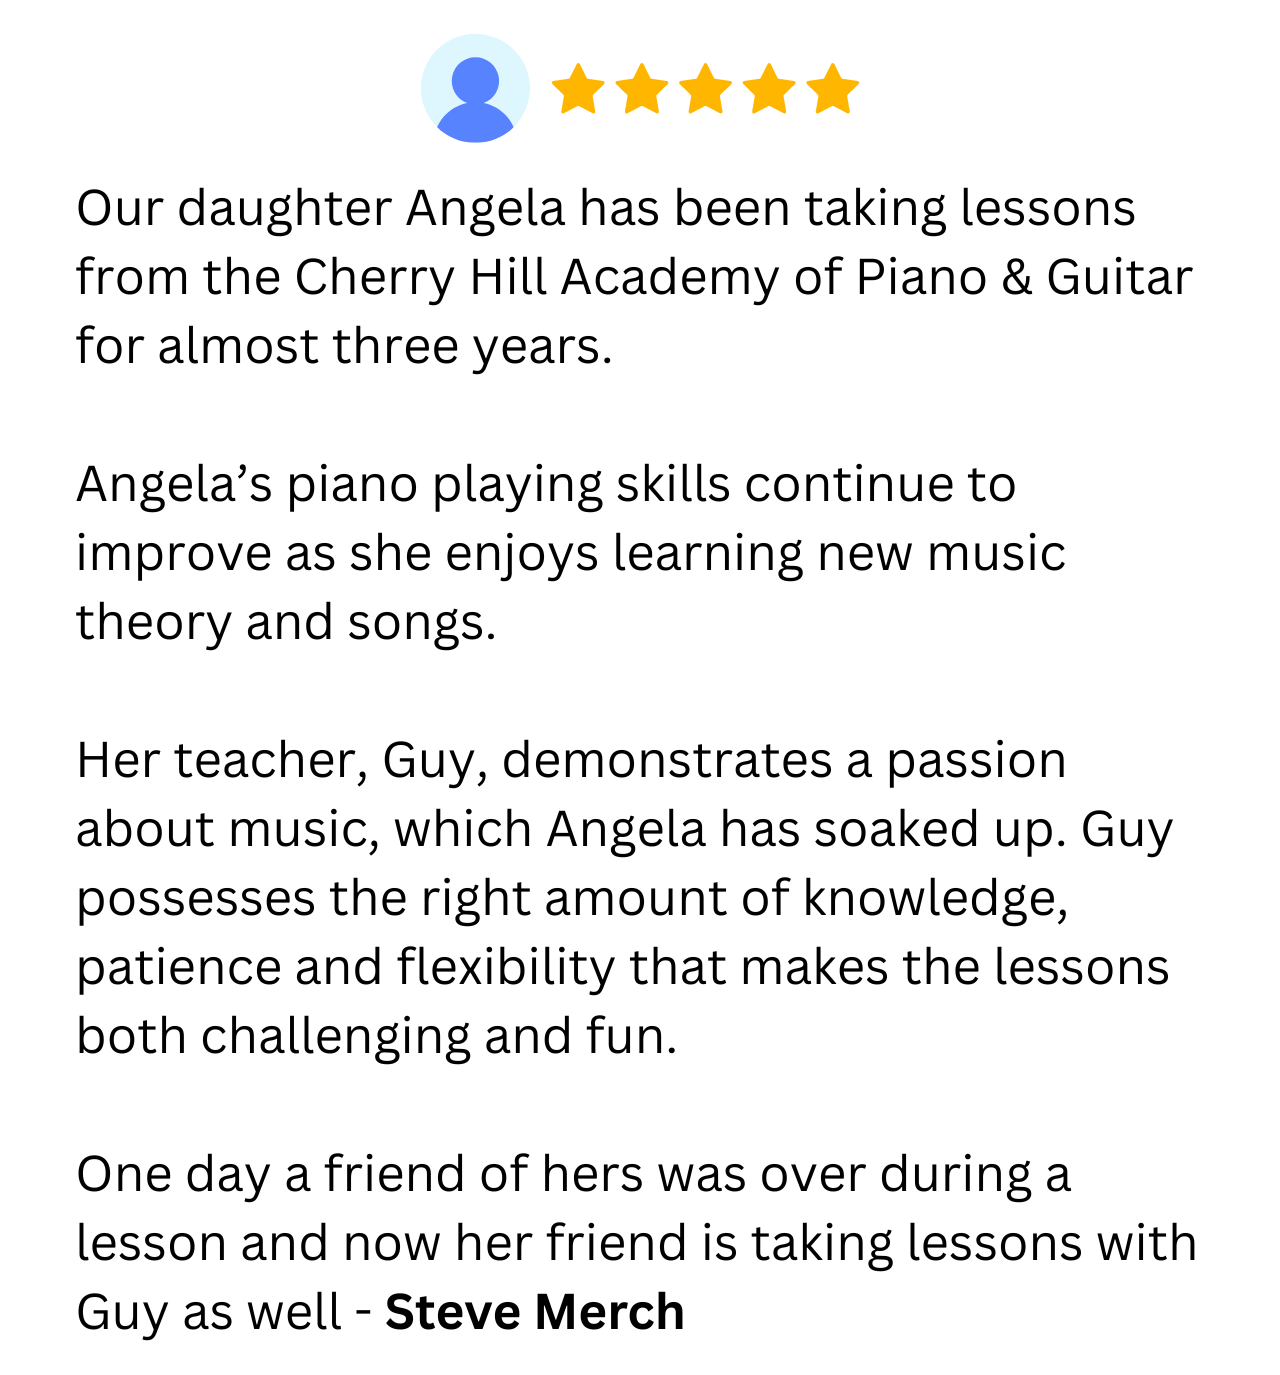 Our daughter Angela has been taking lessons from the Cherry Hill Academy of Piano & Guitar for almost three years.   Angela’s piano playing skills continue to improve as she enjoys learning new music theory and songs.   Her teacher, Guy, demonstrates a passion about music, which Angela has soaked up. Guy possesses the right amount of knowledge, patience and flexibility that makes the lessons both challenging and fun.   One day a friend of hers was over during a lesson and now her friend is taking lessons with Guy as well - Steve Merch